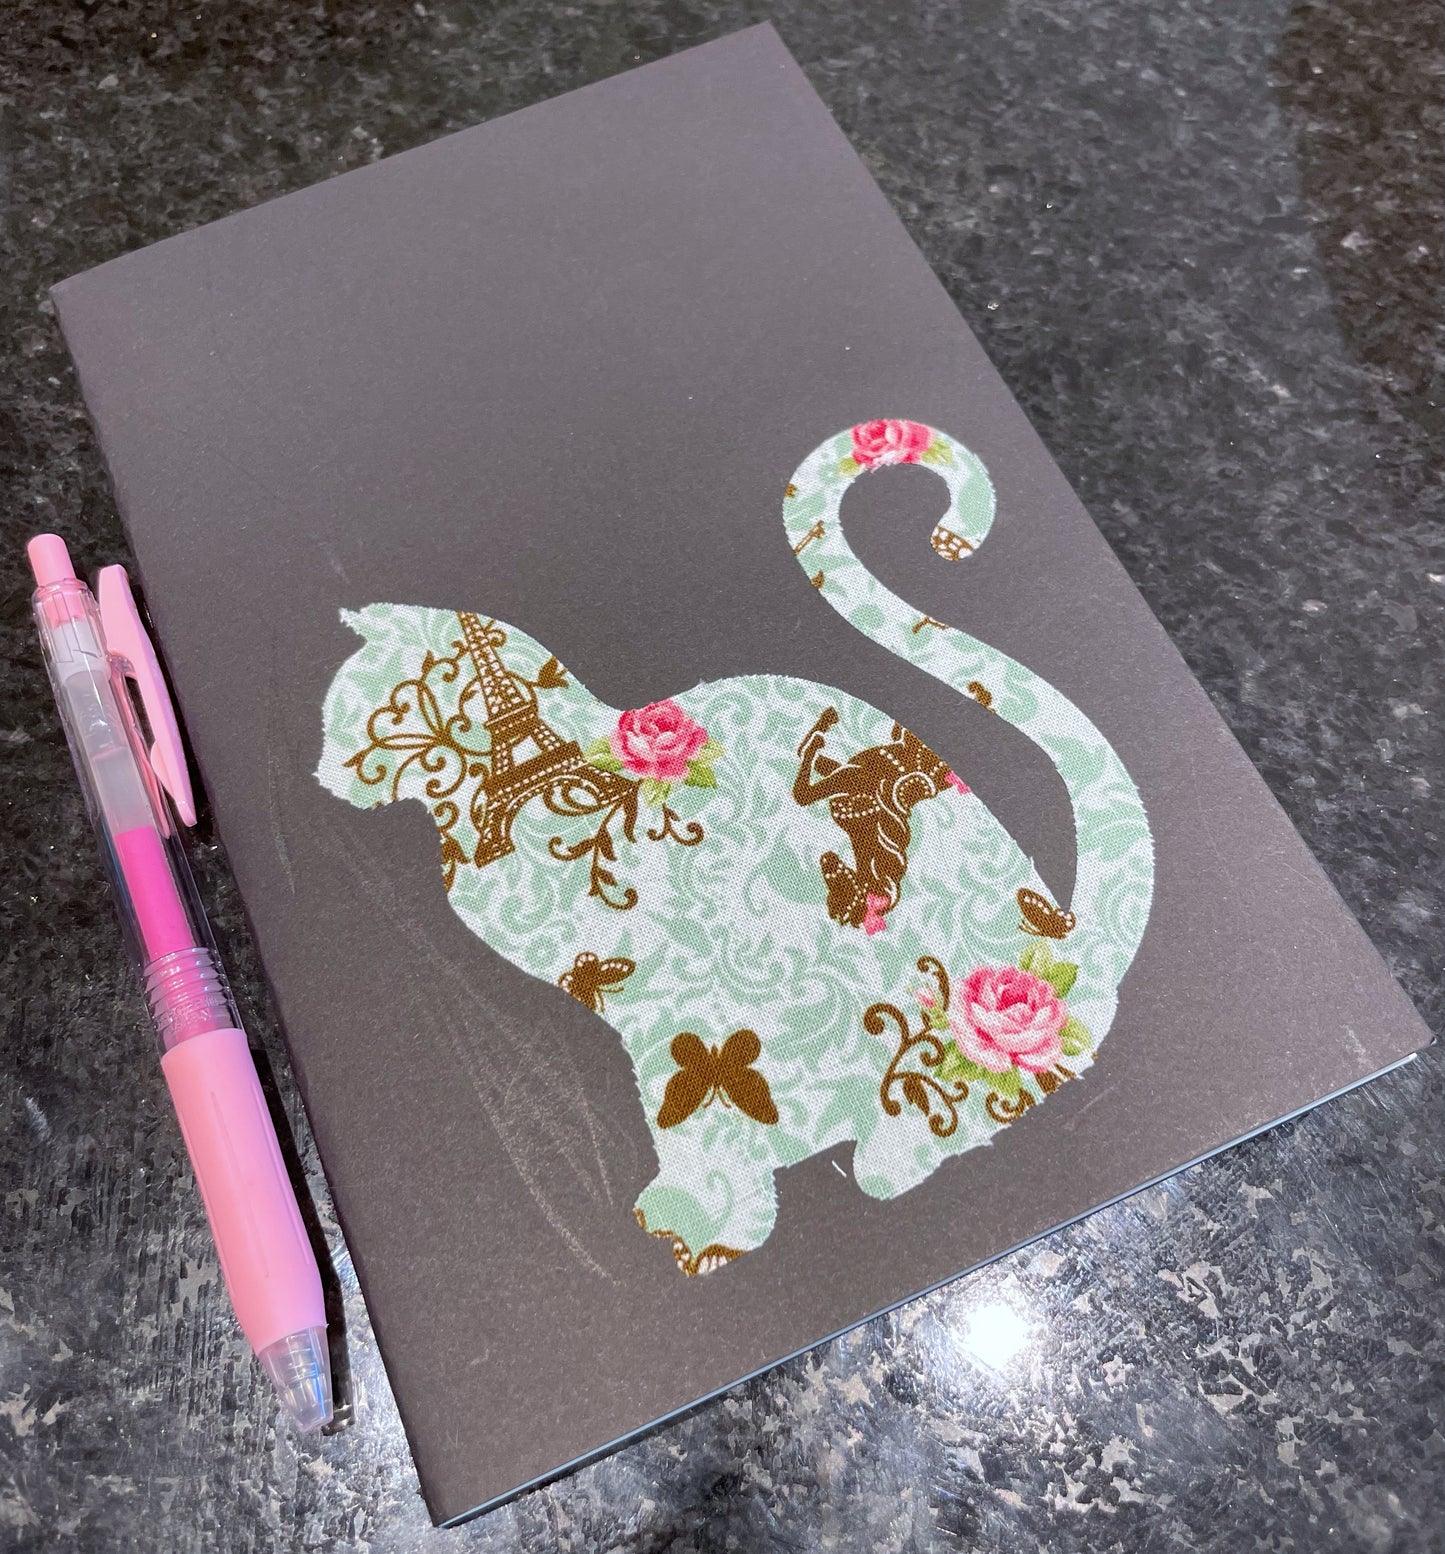 Fabric Appliqué Notebooks | Up Tail Cat Silhouettes